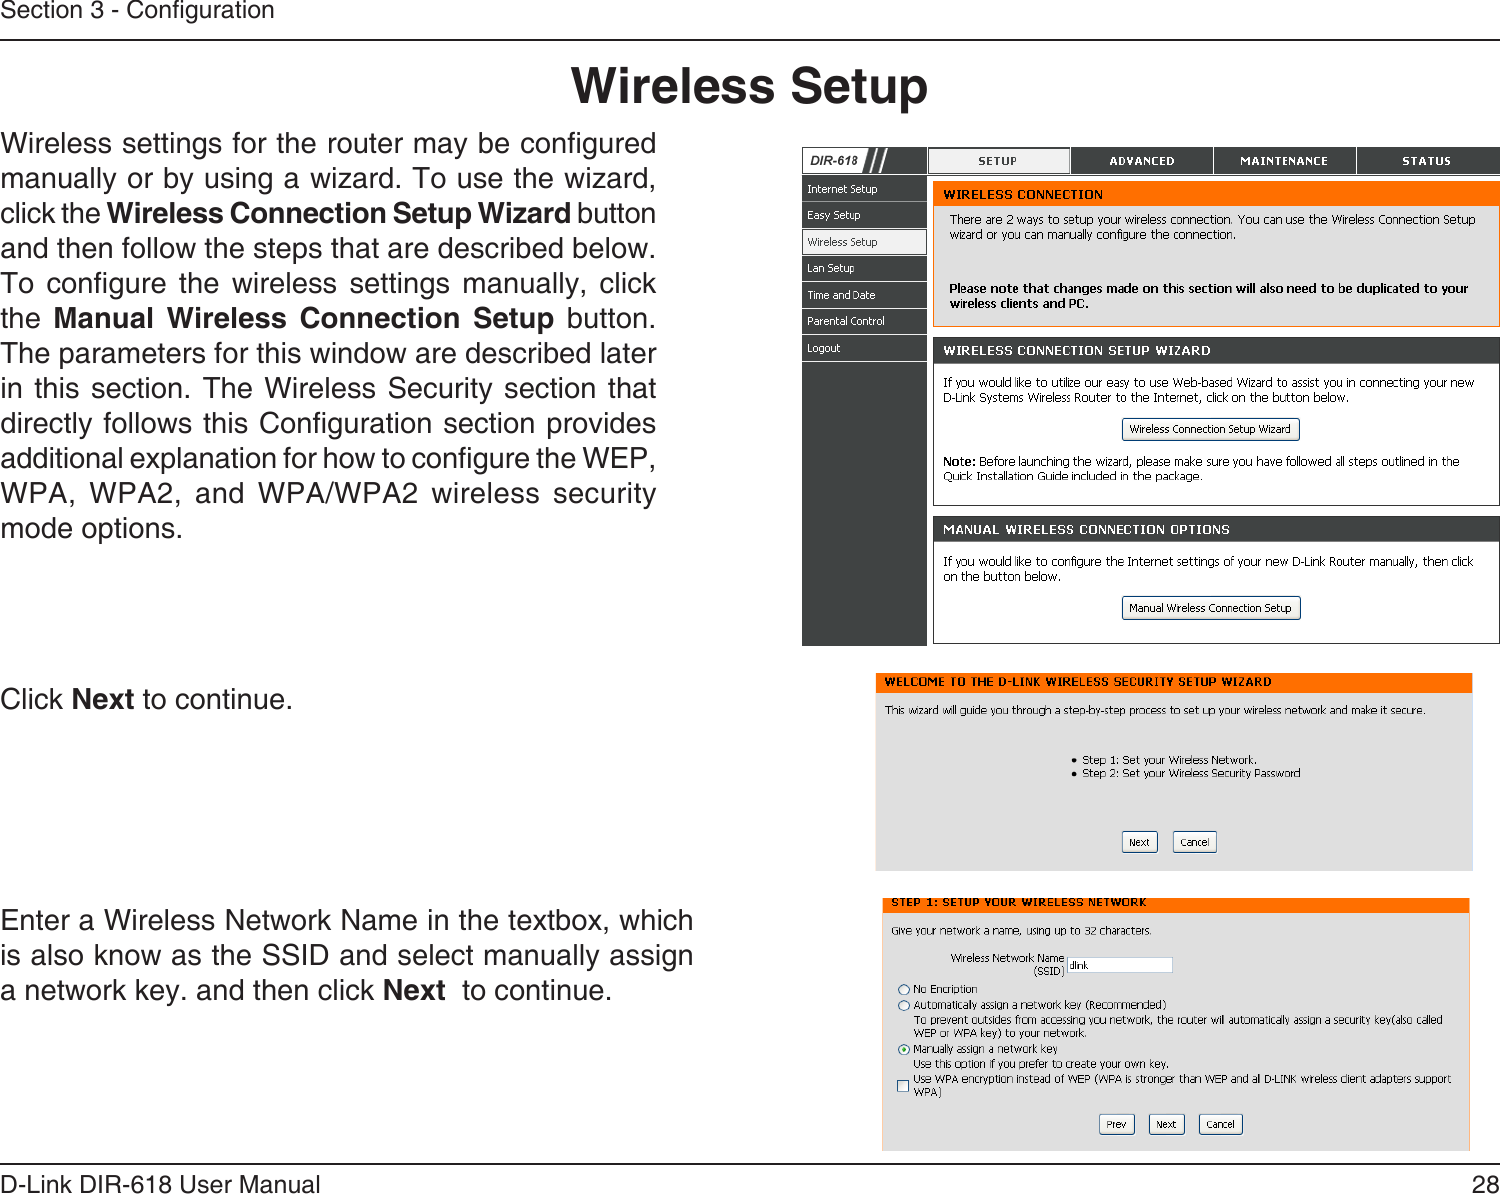 28D-Link DIR-618 User ManualSection 3 - CongurationWireless SetupWireless settings for the router may be congured manually or by using a wizard. To use the wizard, click the Wireless Connection Setup Wizard buttonand then follow the steps that are described below.To congure the wireless settings manually, click the  Manual Wireless Connection Setup button. The parameters for this window are described laterin this section. The Wireless  Security section  thatdirectly follows this Conguration section provides   additional explanation for how to congure the WEP, WPA, WPA2, and WPA/WPA2 wireless security mode options. Click Next to continue.Enter a Wireless Network Name in the textbox, which is also know as the SSID and select manually assigna network key. and then click Next  to continue.